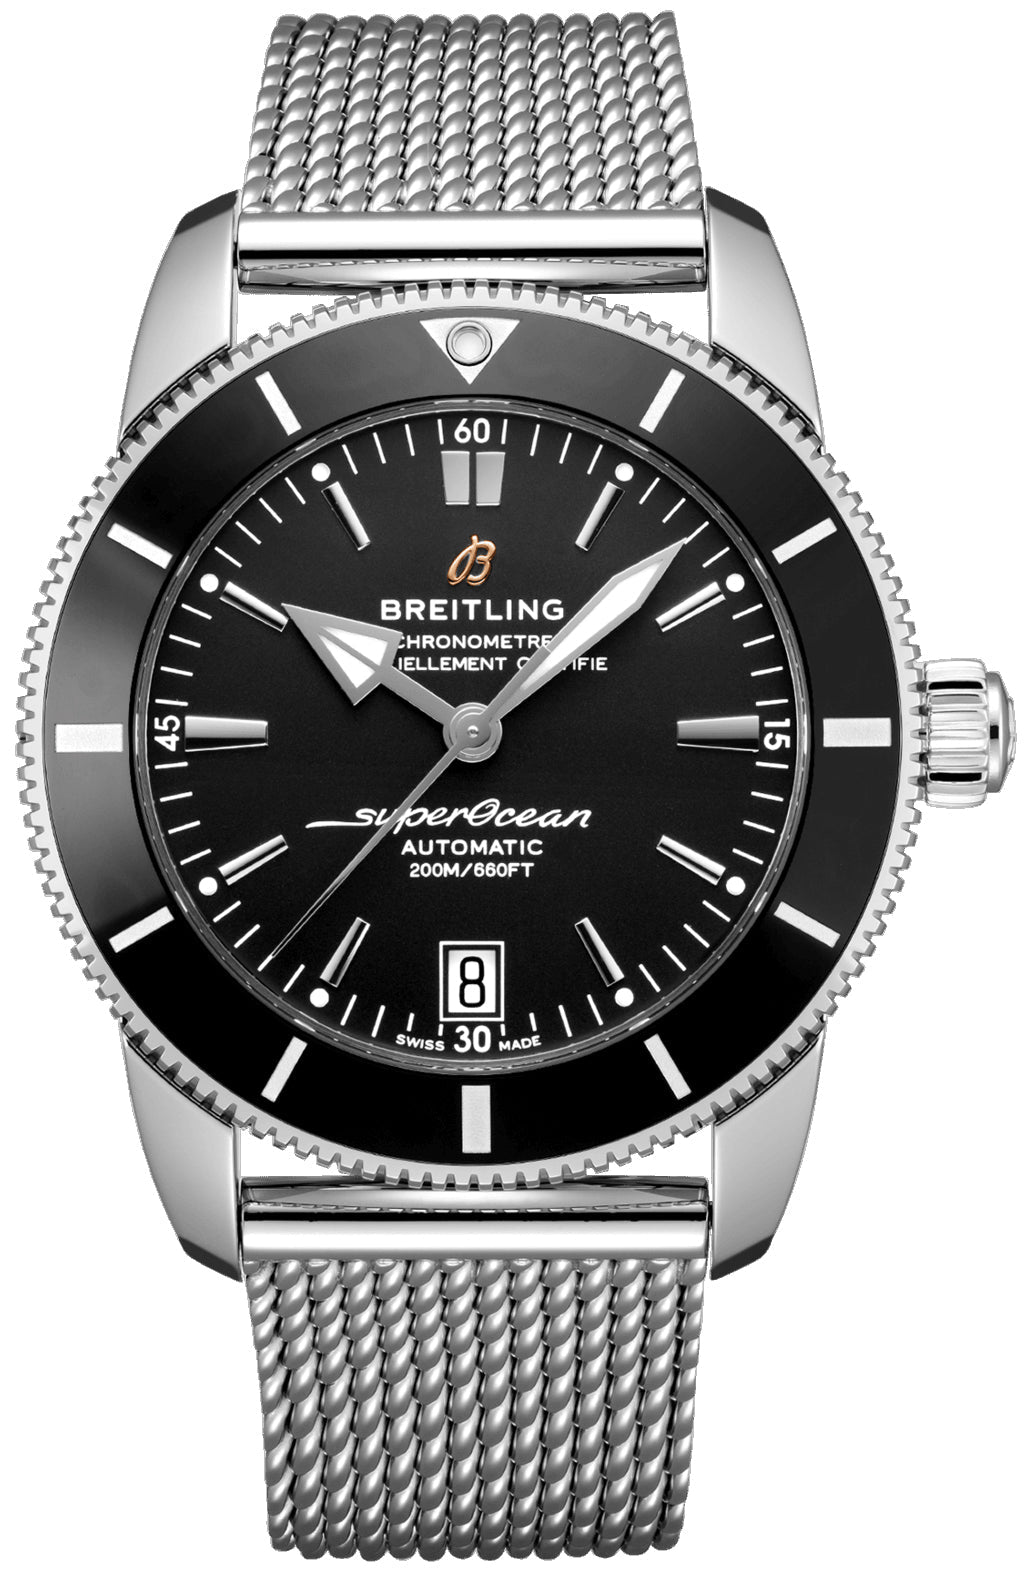 update alt-text with template Watches - Mens-Breitling-AB2010121B1A1-40 - 45 mm, black, Breitling, compass, COSC, date, divers, mens, menswatches, new arrivals, round, special / limited edition, stainless steel band, stainless steel case, Superocean Heritage, swiss automatic, uni-directional rotating bezel, watches-Watches & Beyond